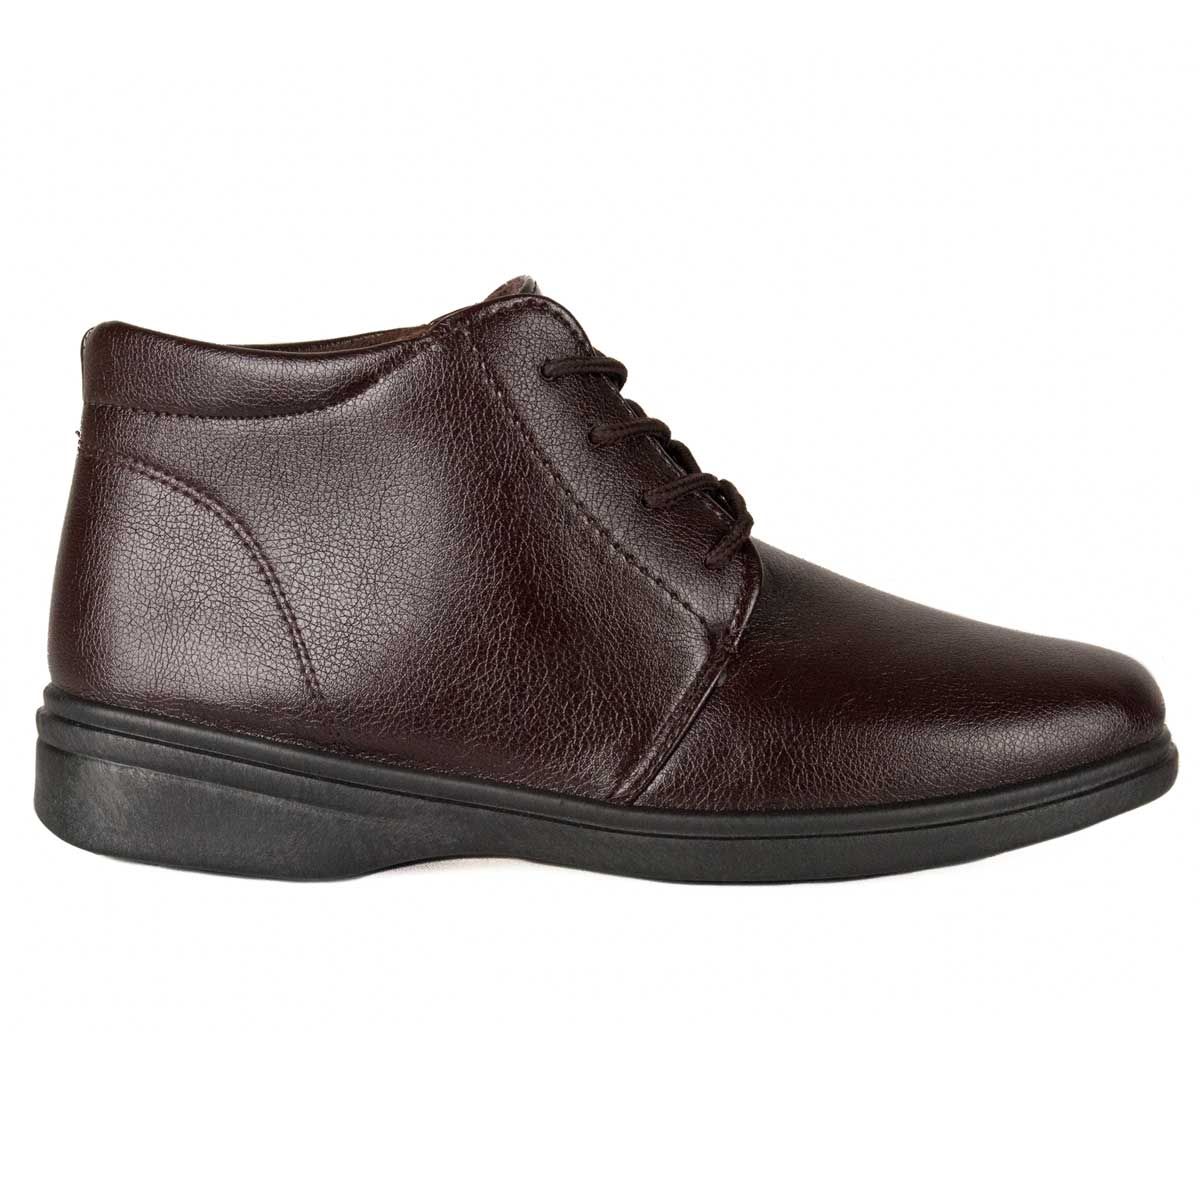 Comfortable and light boot for men with laces of thread, perfect for the day for its super flexible and perfectly adaptable to the foot. The ankle area is padded, to provide greater comfort. Its double seam gives the boot firmness and consistency. Interior area and plant coarse hair lined. Foreign material Very easy to clean. Light floor and anti-slip rubber sole.